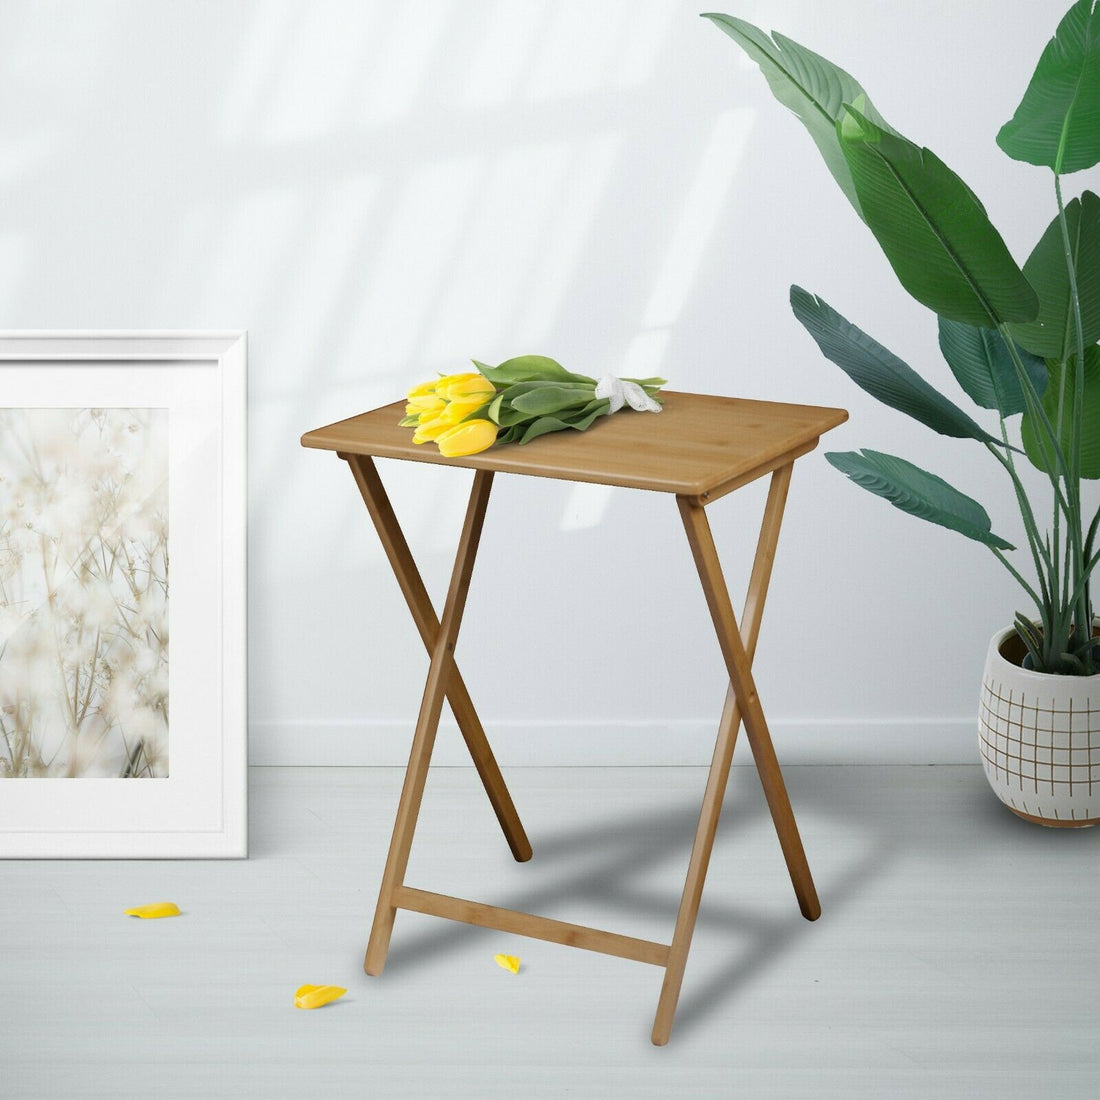 The Ultimate Versatility: Unveiling the Folding Bamboo Tray for Modern Living